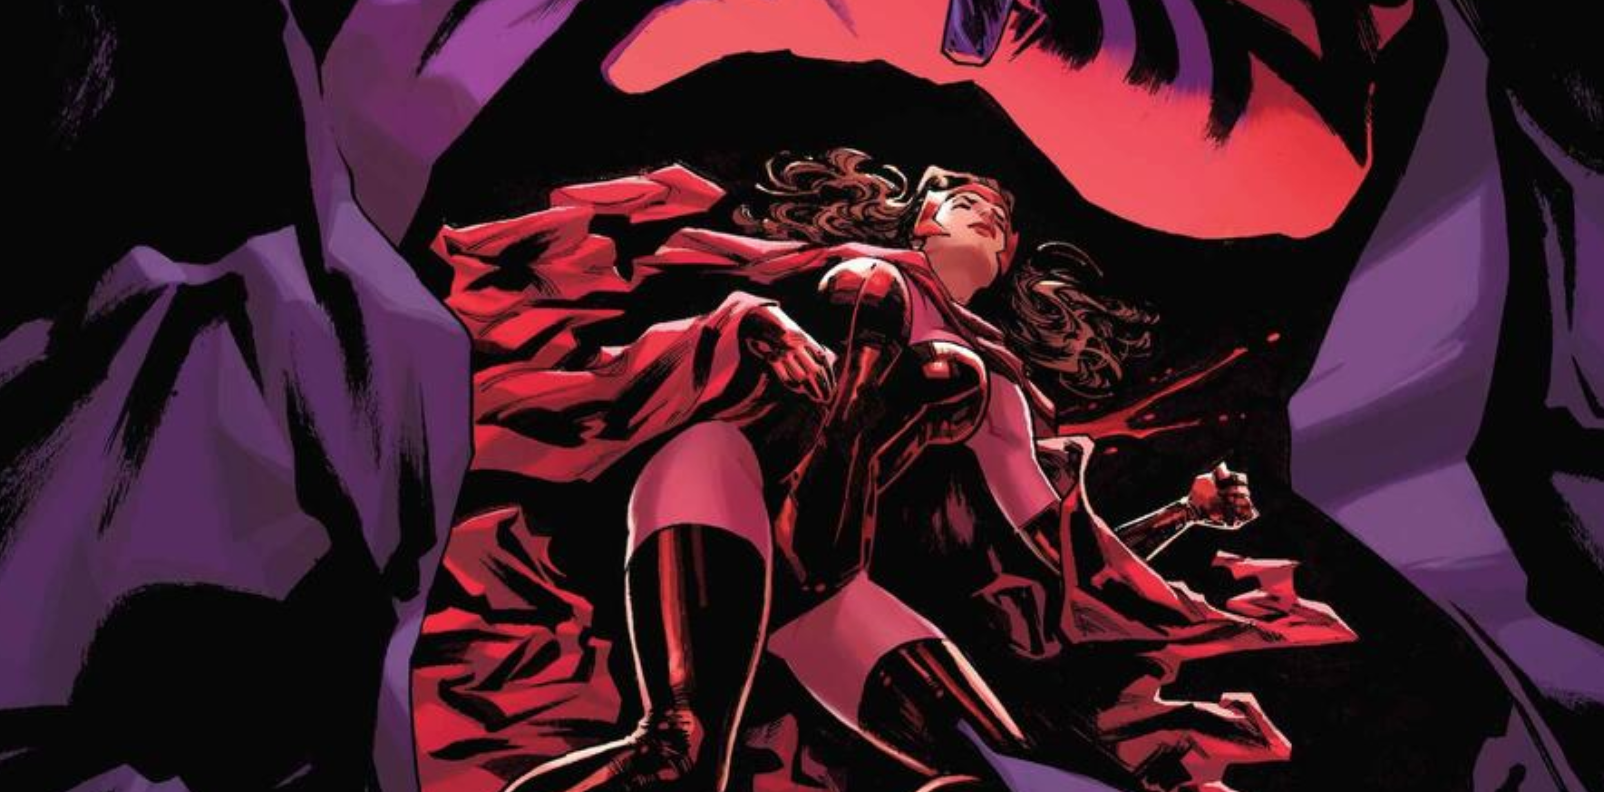 Scarlet Witch Death MarvelBlog News for August 30th